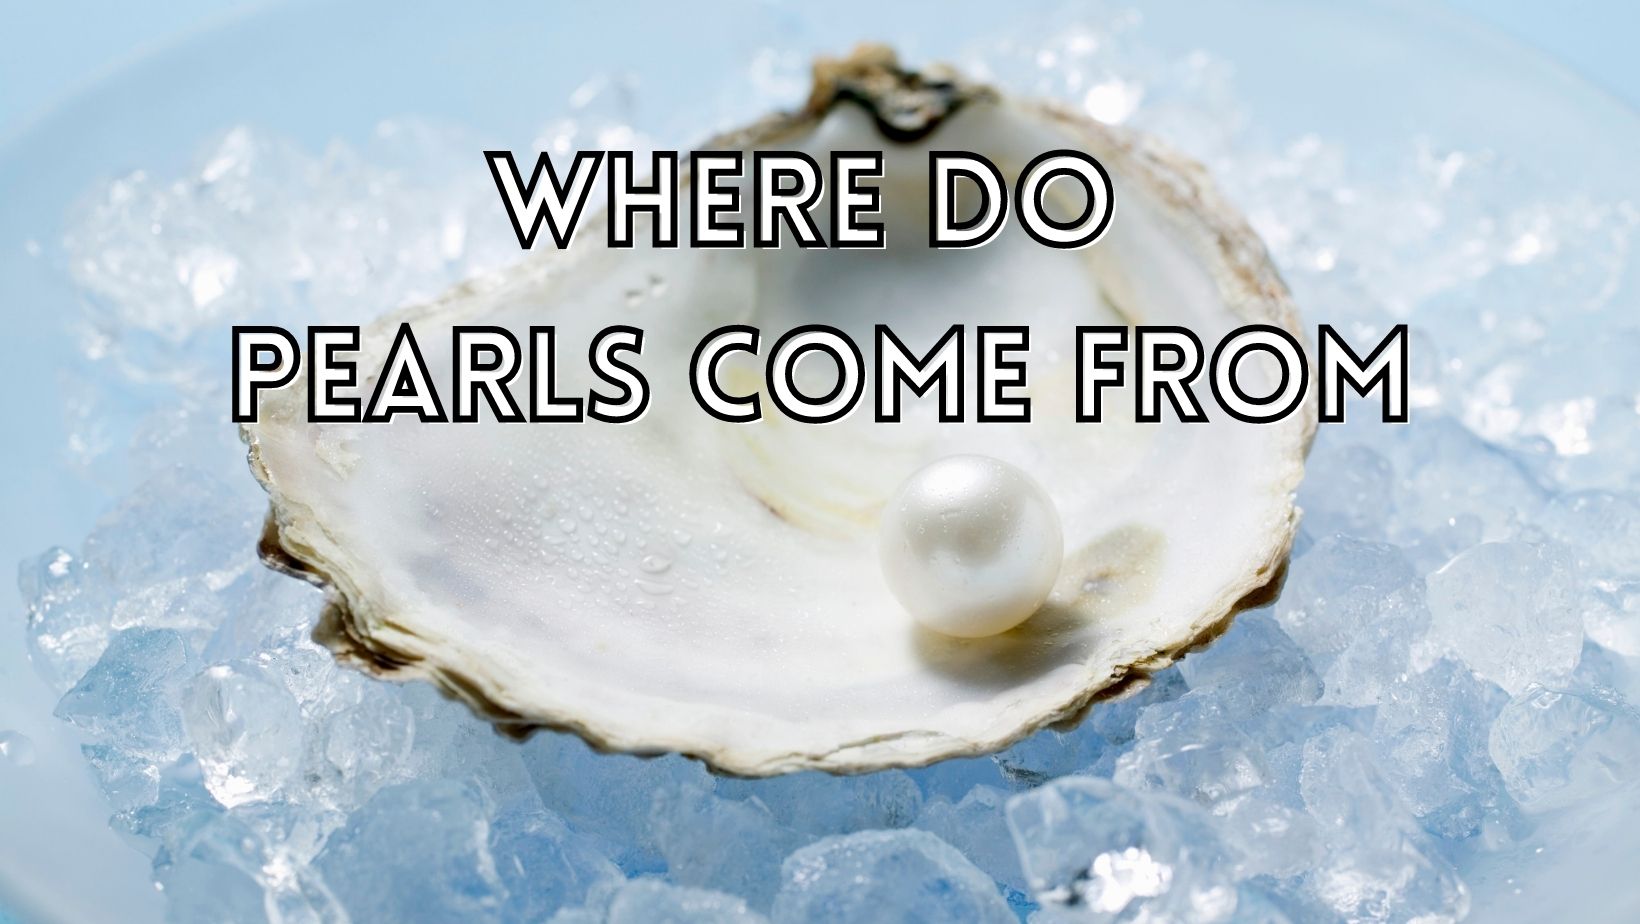 Where do pearls come from